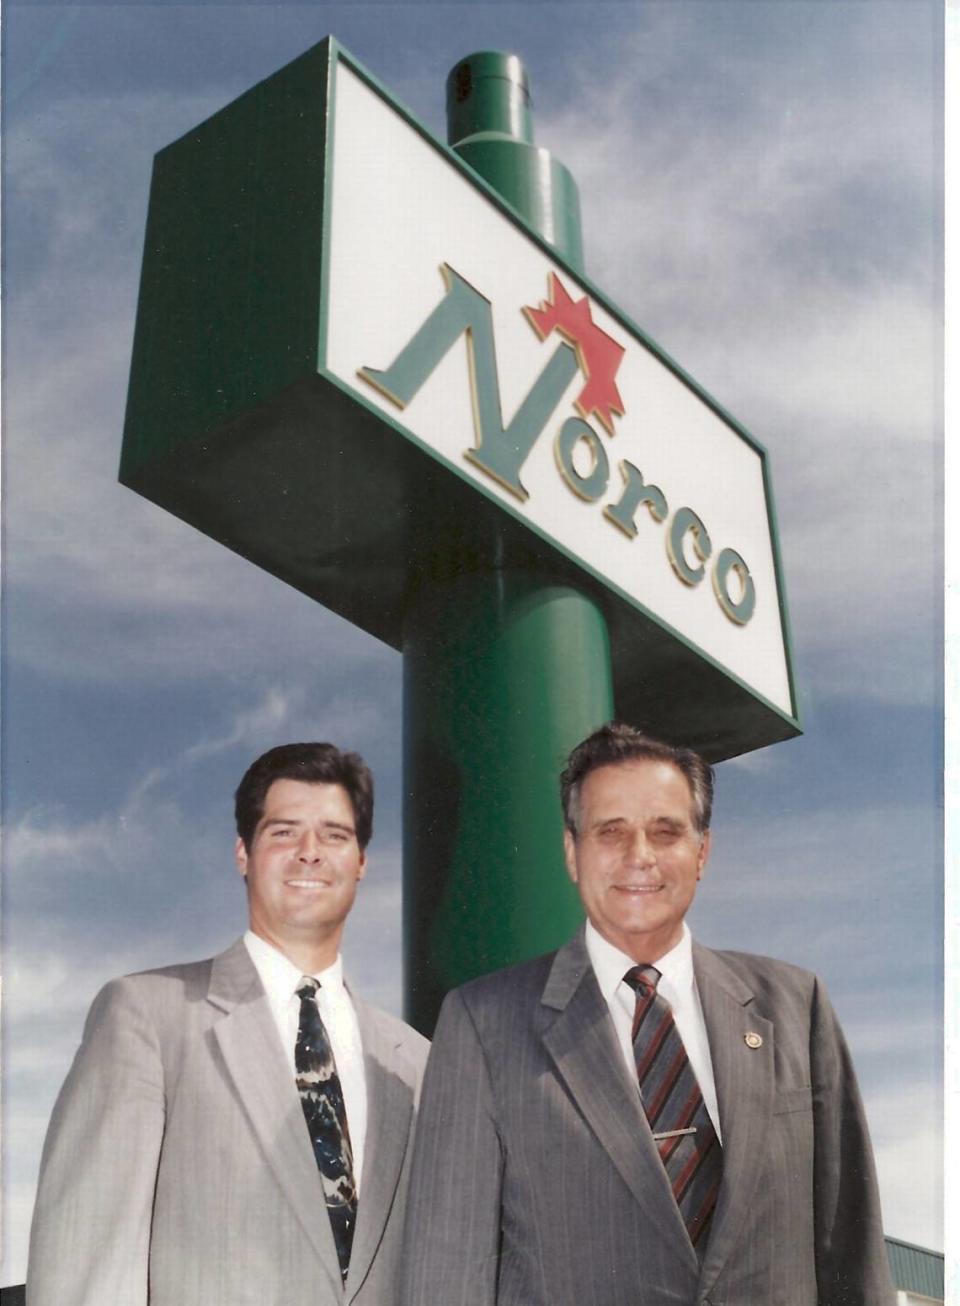 Jim Kissler, left, stands in front of Norco’s medical supply building with his late father, Larry Kissler, in 2002.